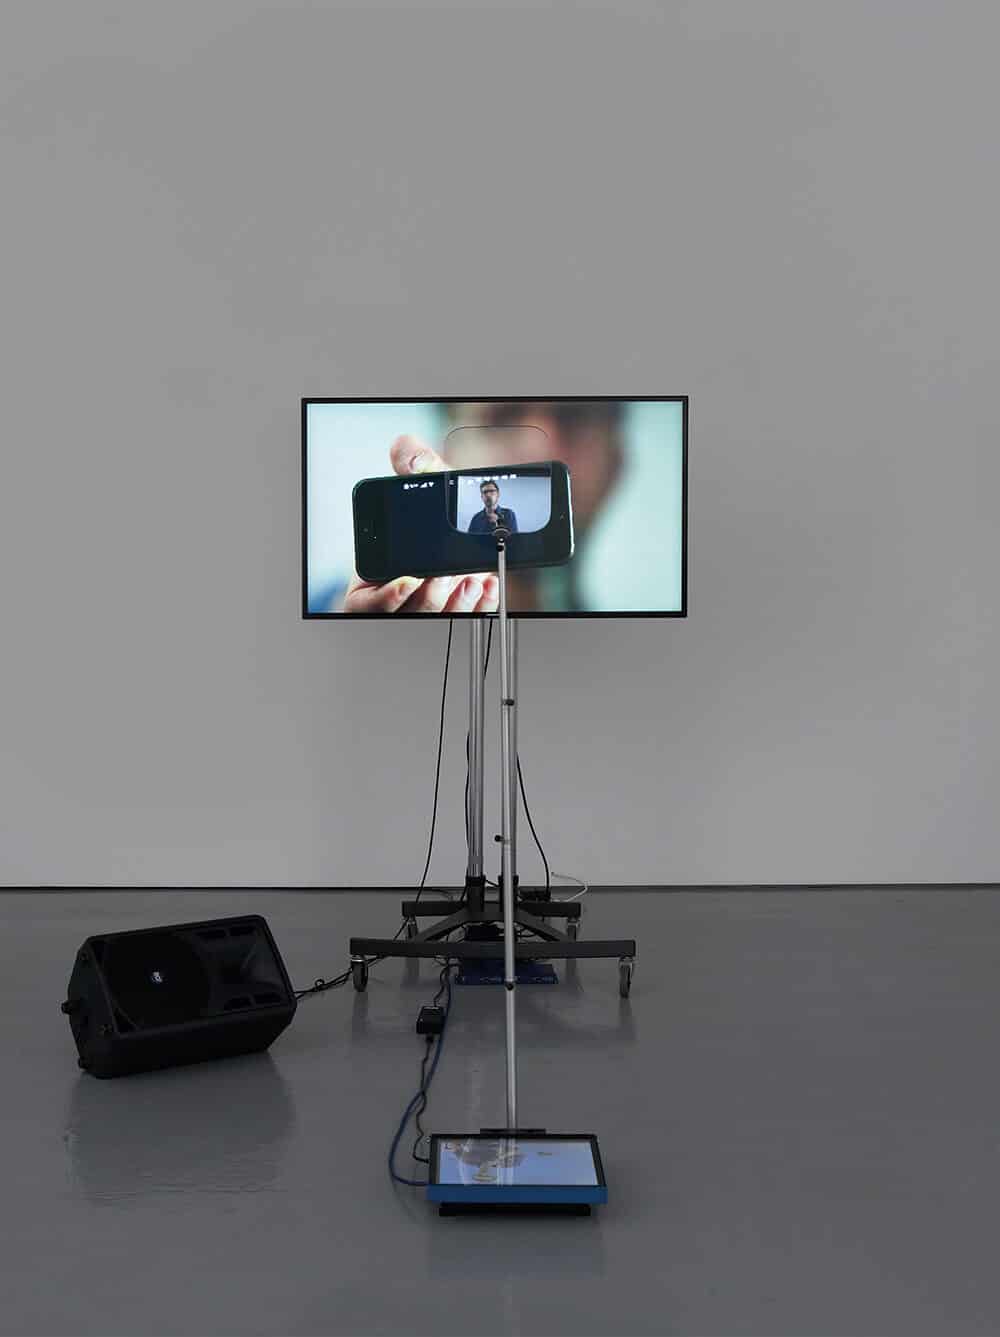 Lawrence Abu Hamdan, Contra Diction (speech against itself), 2015. Two channel video installation, teleprompter, screen, speaker variable dimensions. © Lawrence Abu Hamdan, courtesy Maureen Paley, London.